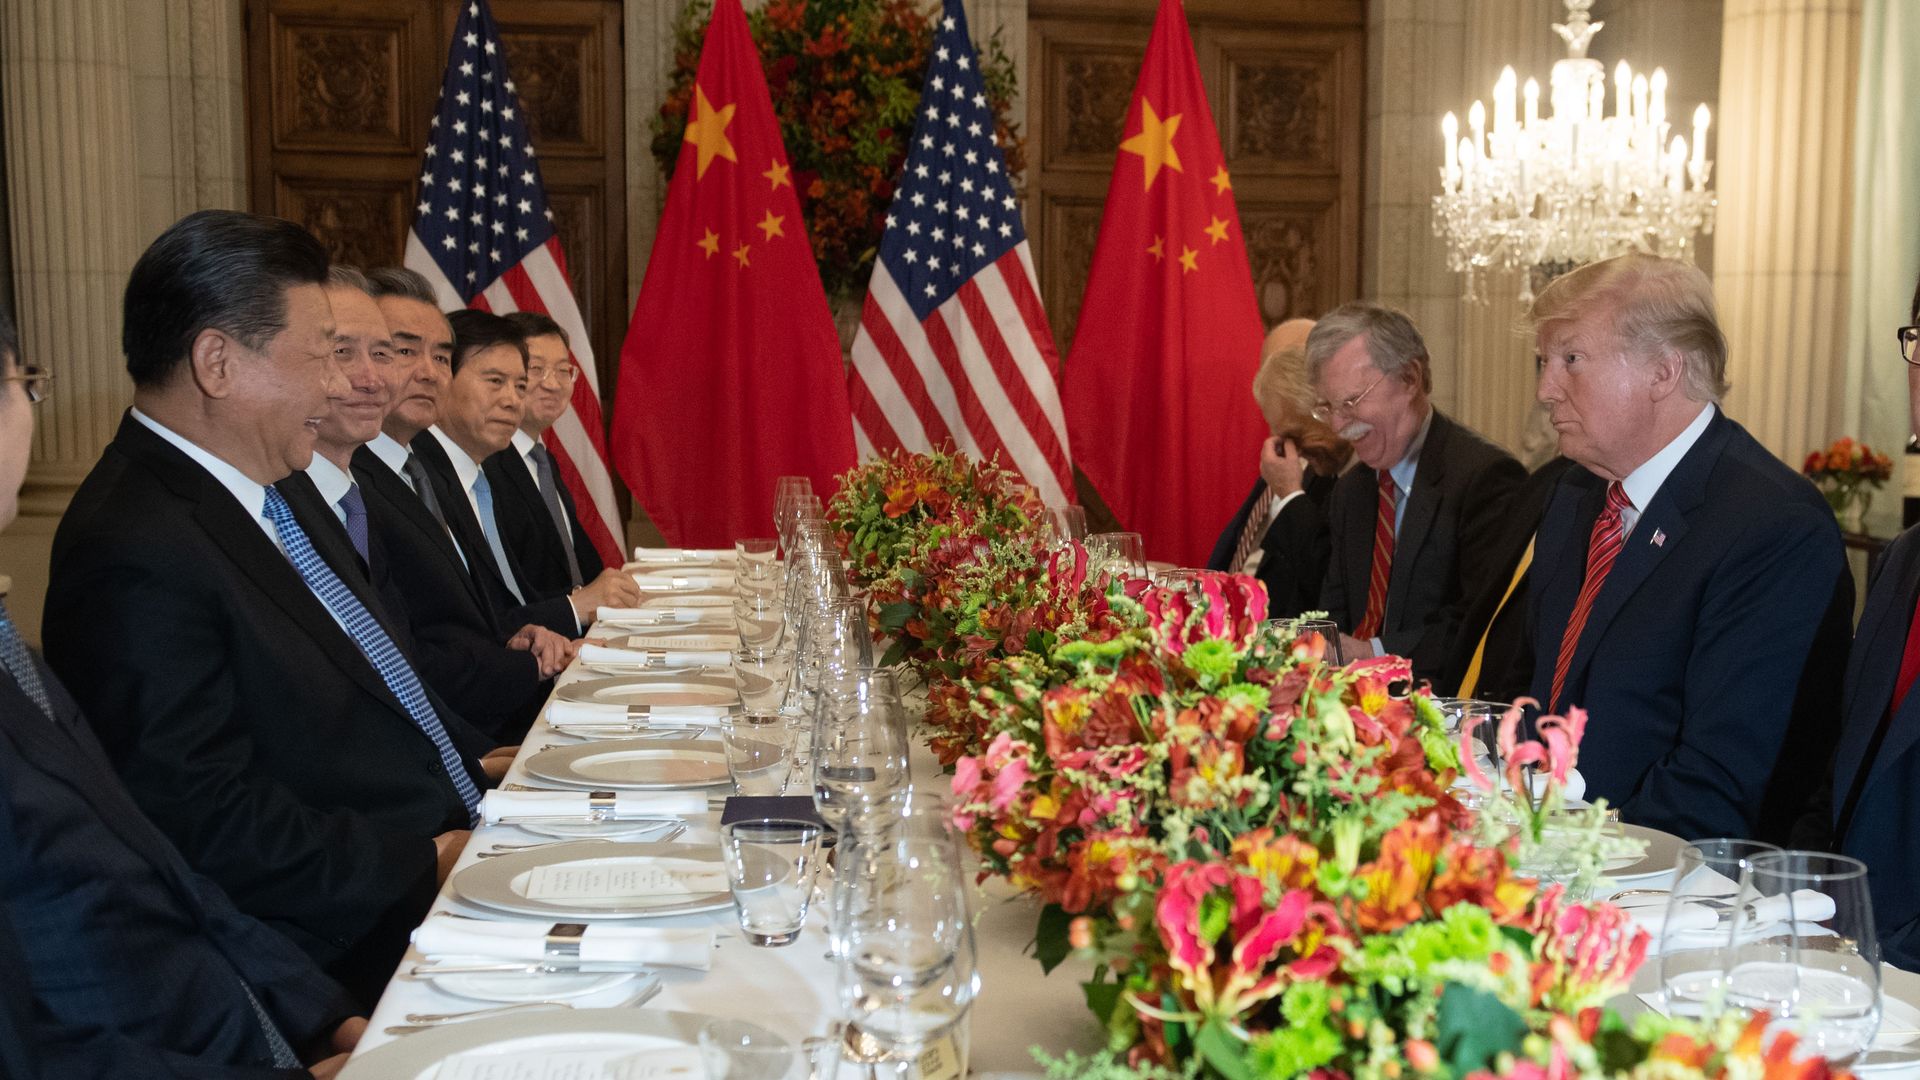 US President Donald Trump (R) and China's President Xi Jinping (L) along with members of their delegations, hold a dinner meeting at the end of the G20 summit.